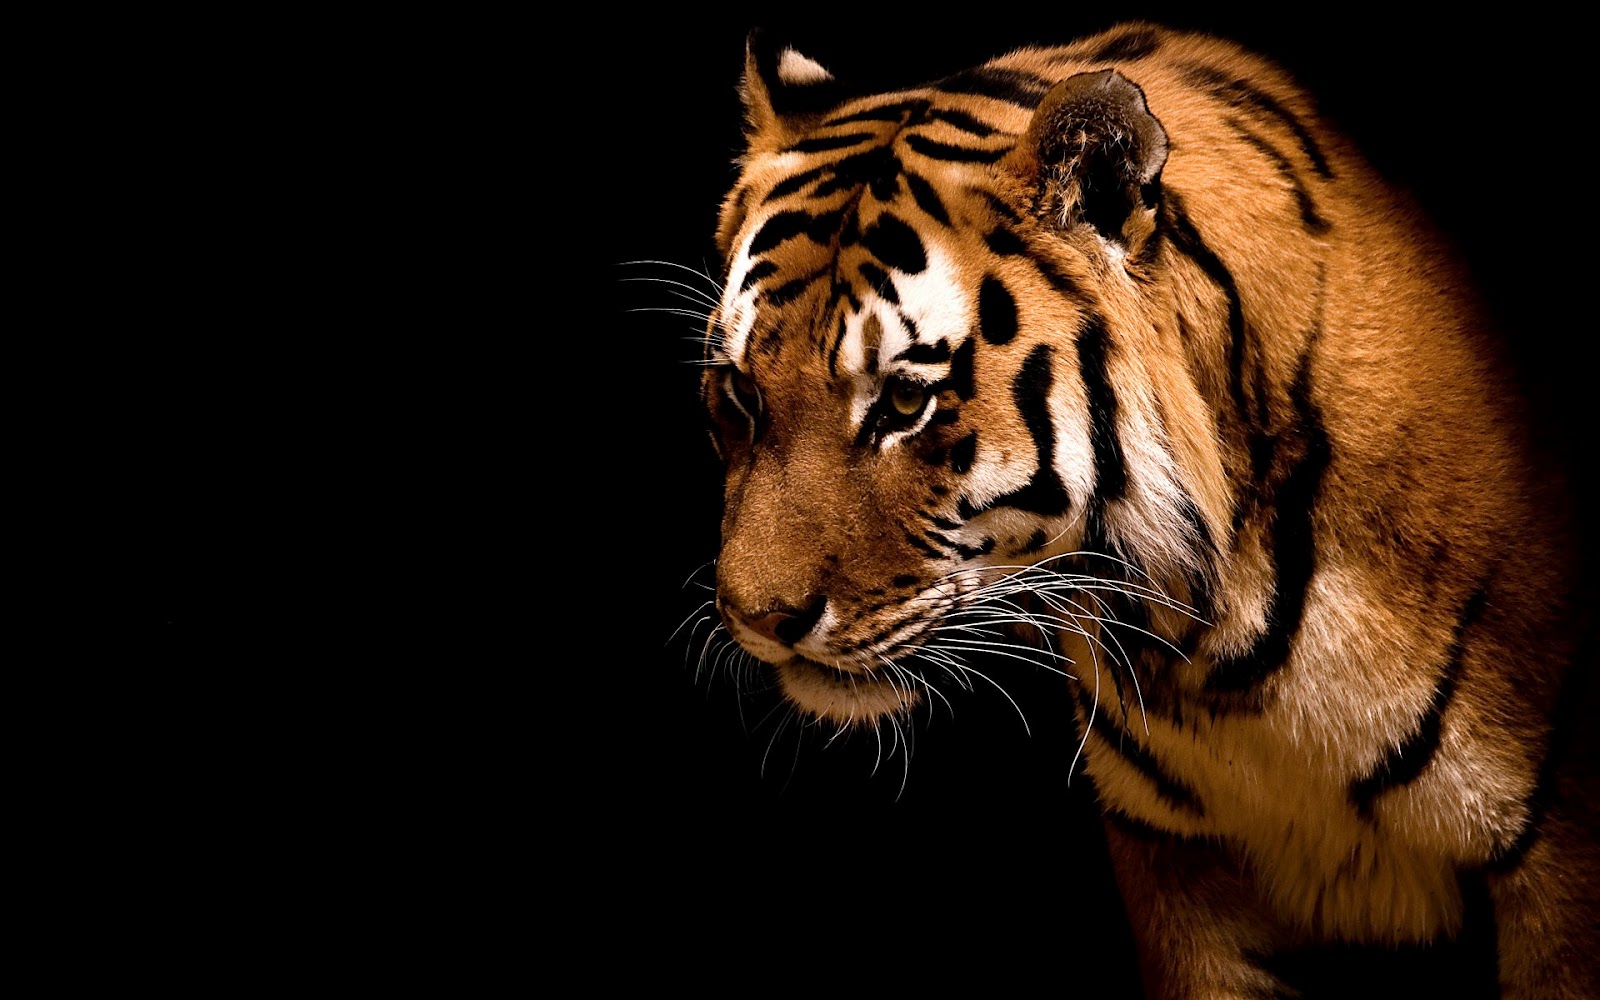 Amazing Tiger 4k Background Wallpapers